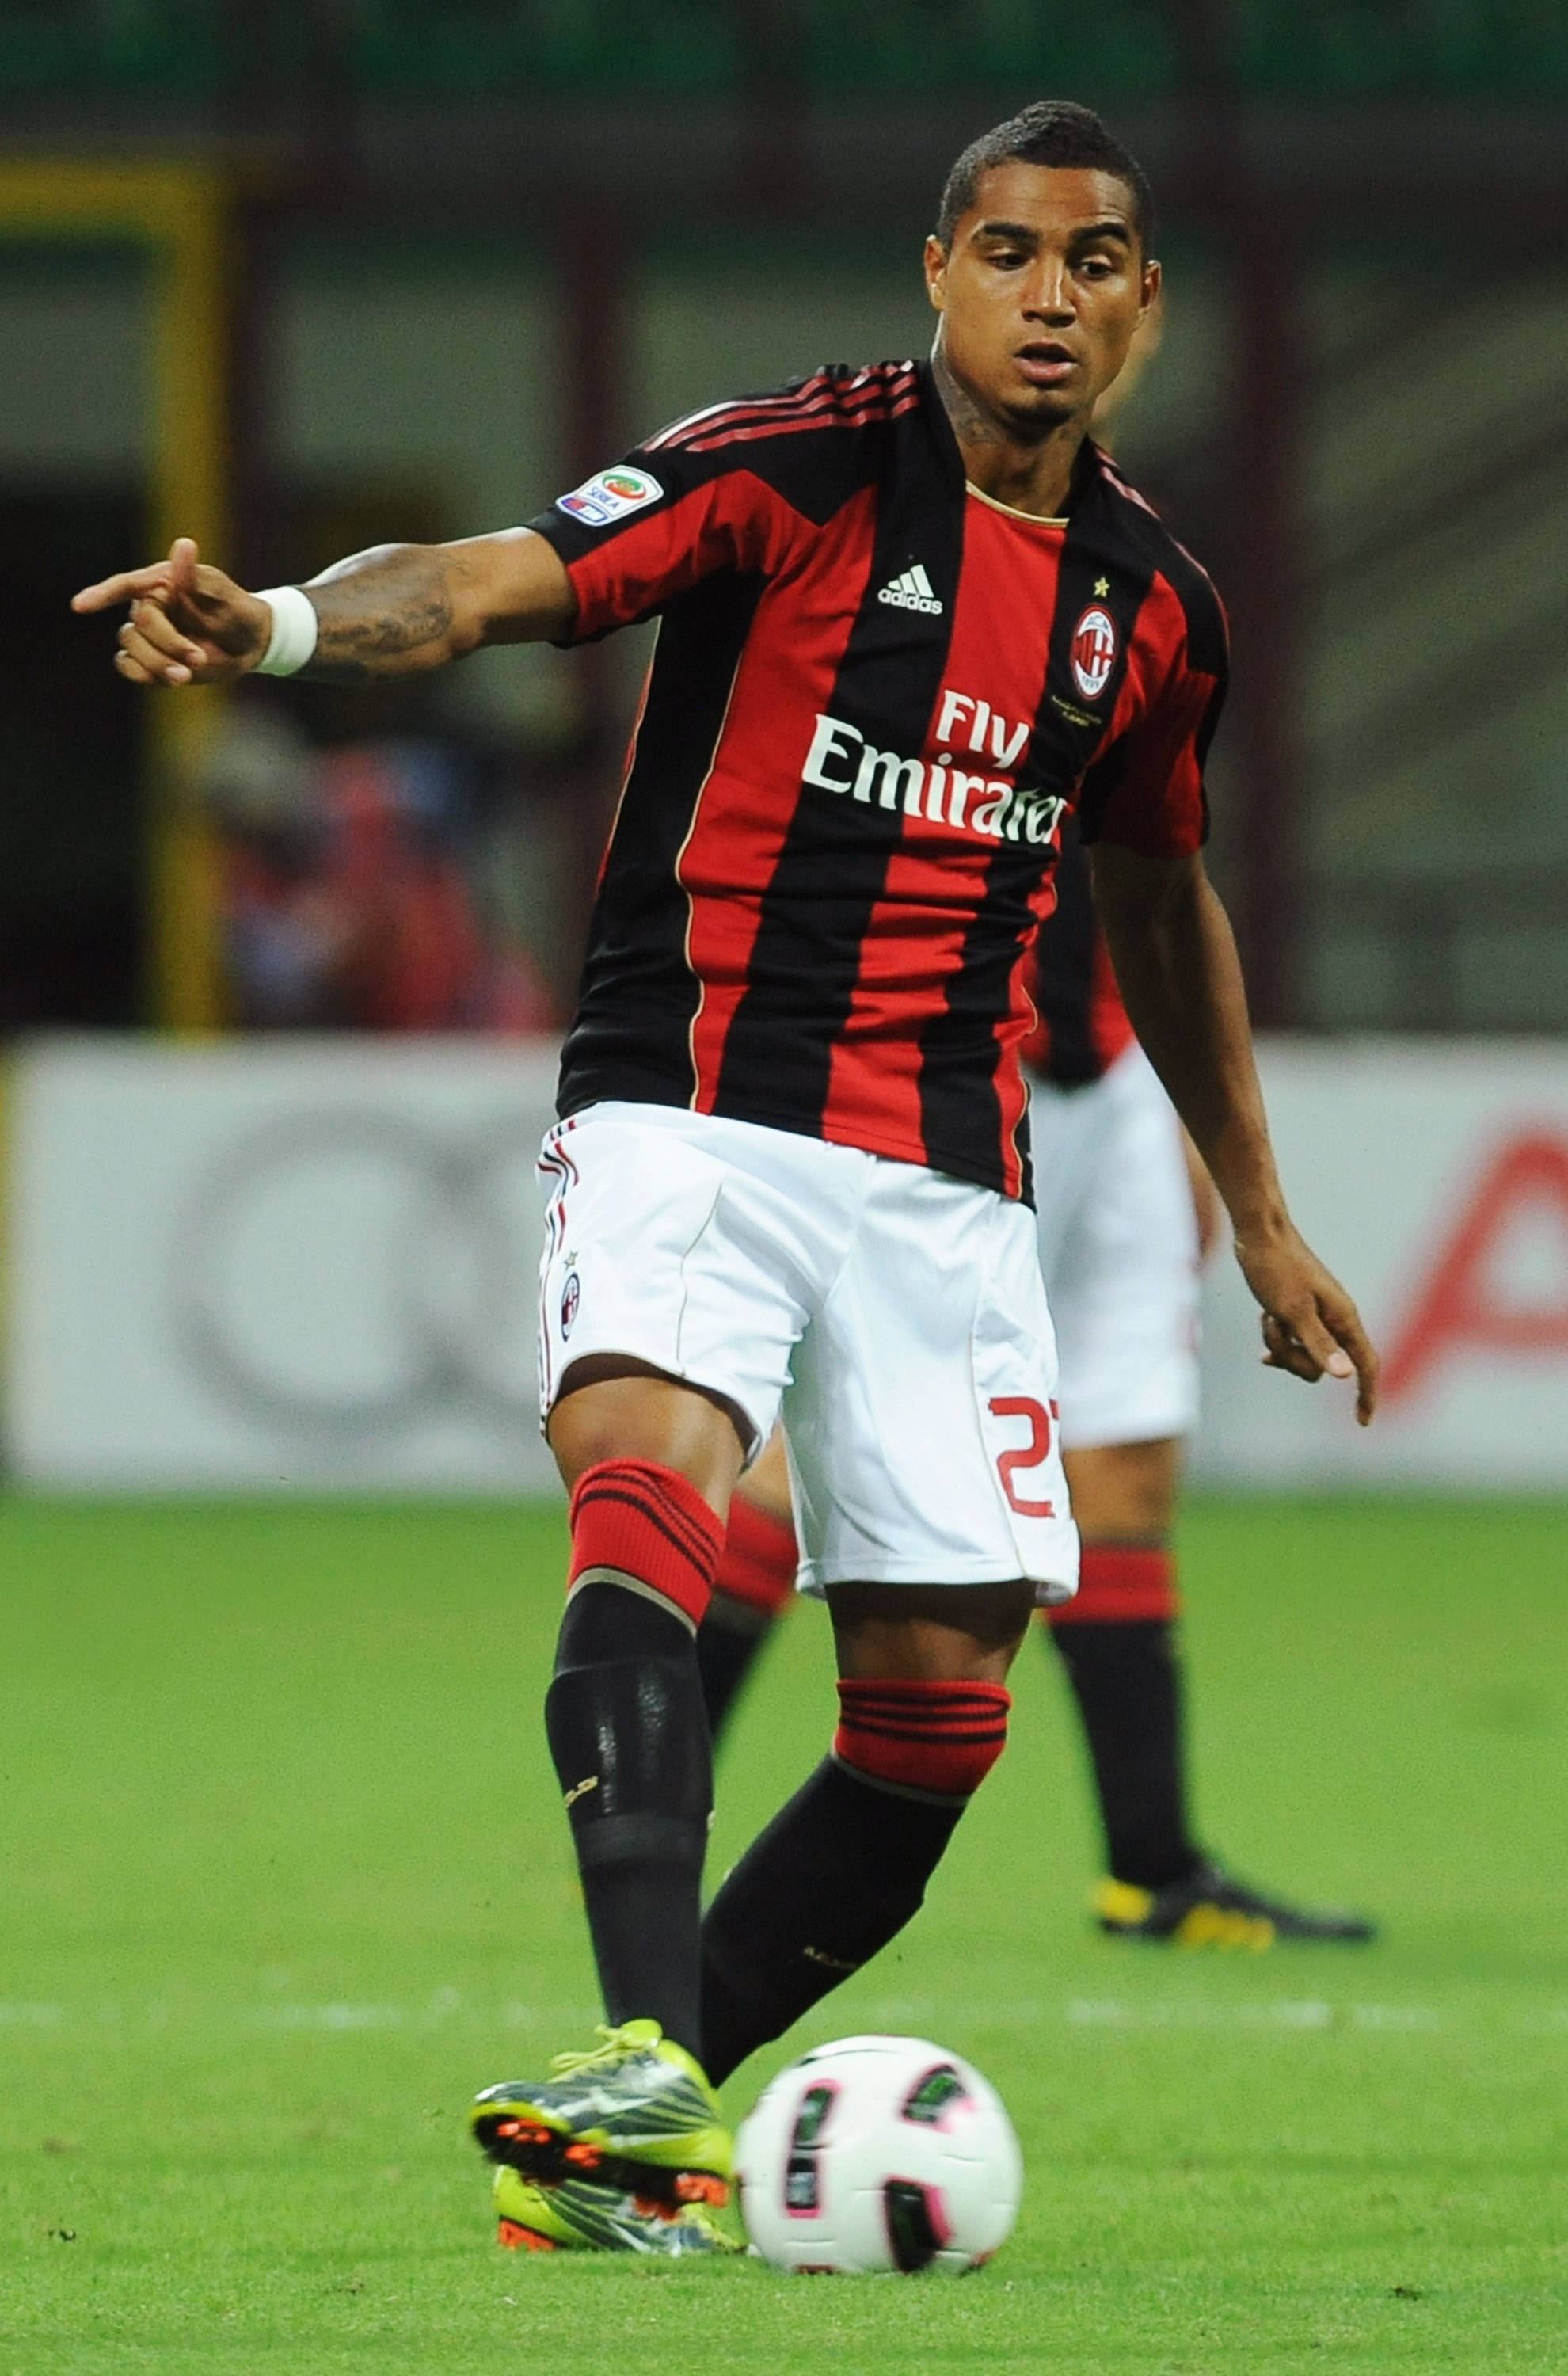 MILAN, ITALY - AUGUST 29:  Kevin Prince Boateng of AC Milan in action during the Serie A match between AC Milan and US Lecce at Stadio Giuseppe Meazza on August 29, 2010 in Milan, Italy.  (Photo by Valerio Pennicino/Getty Images)